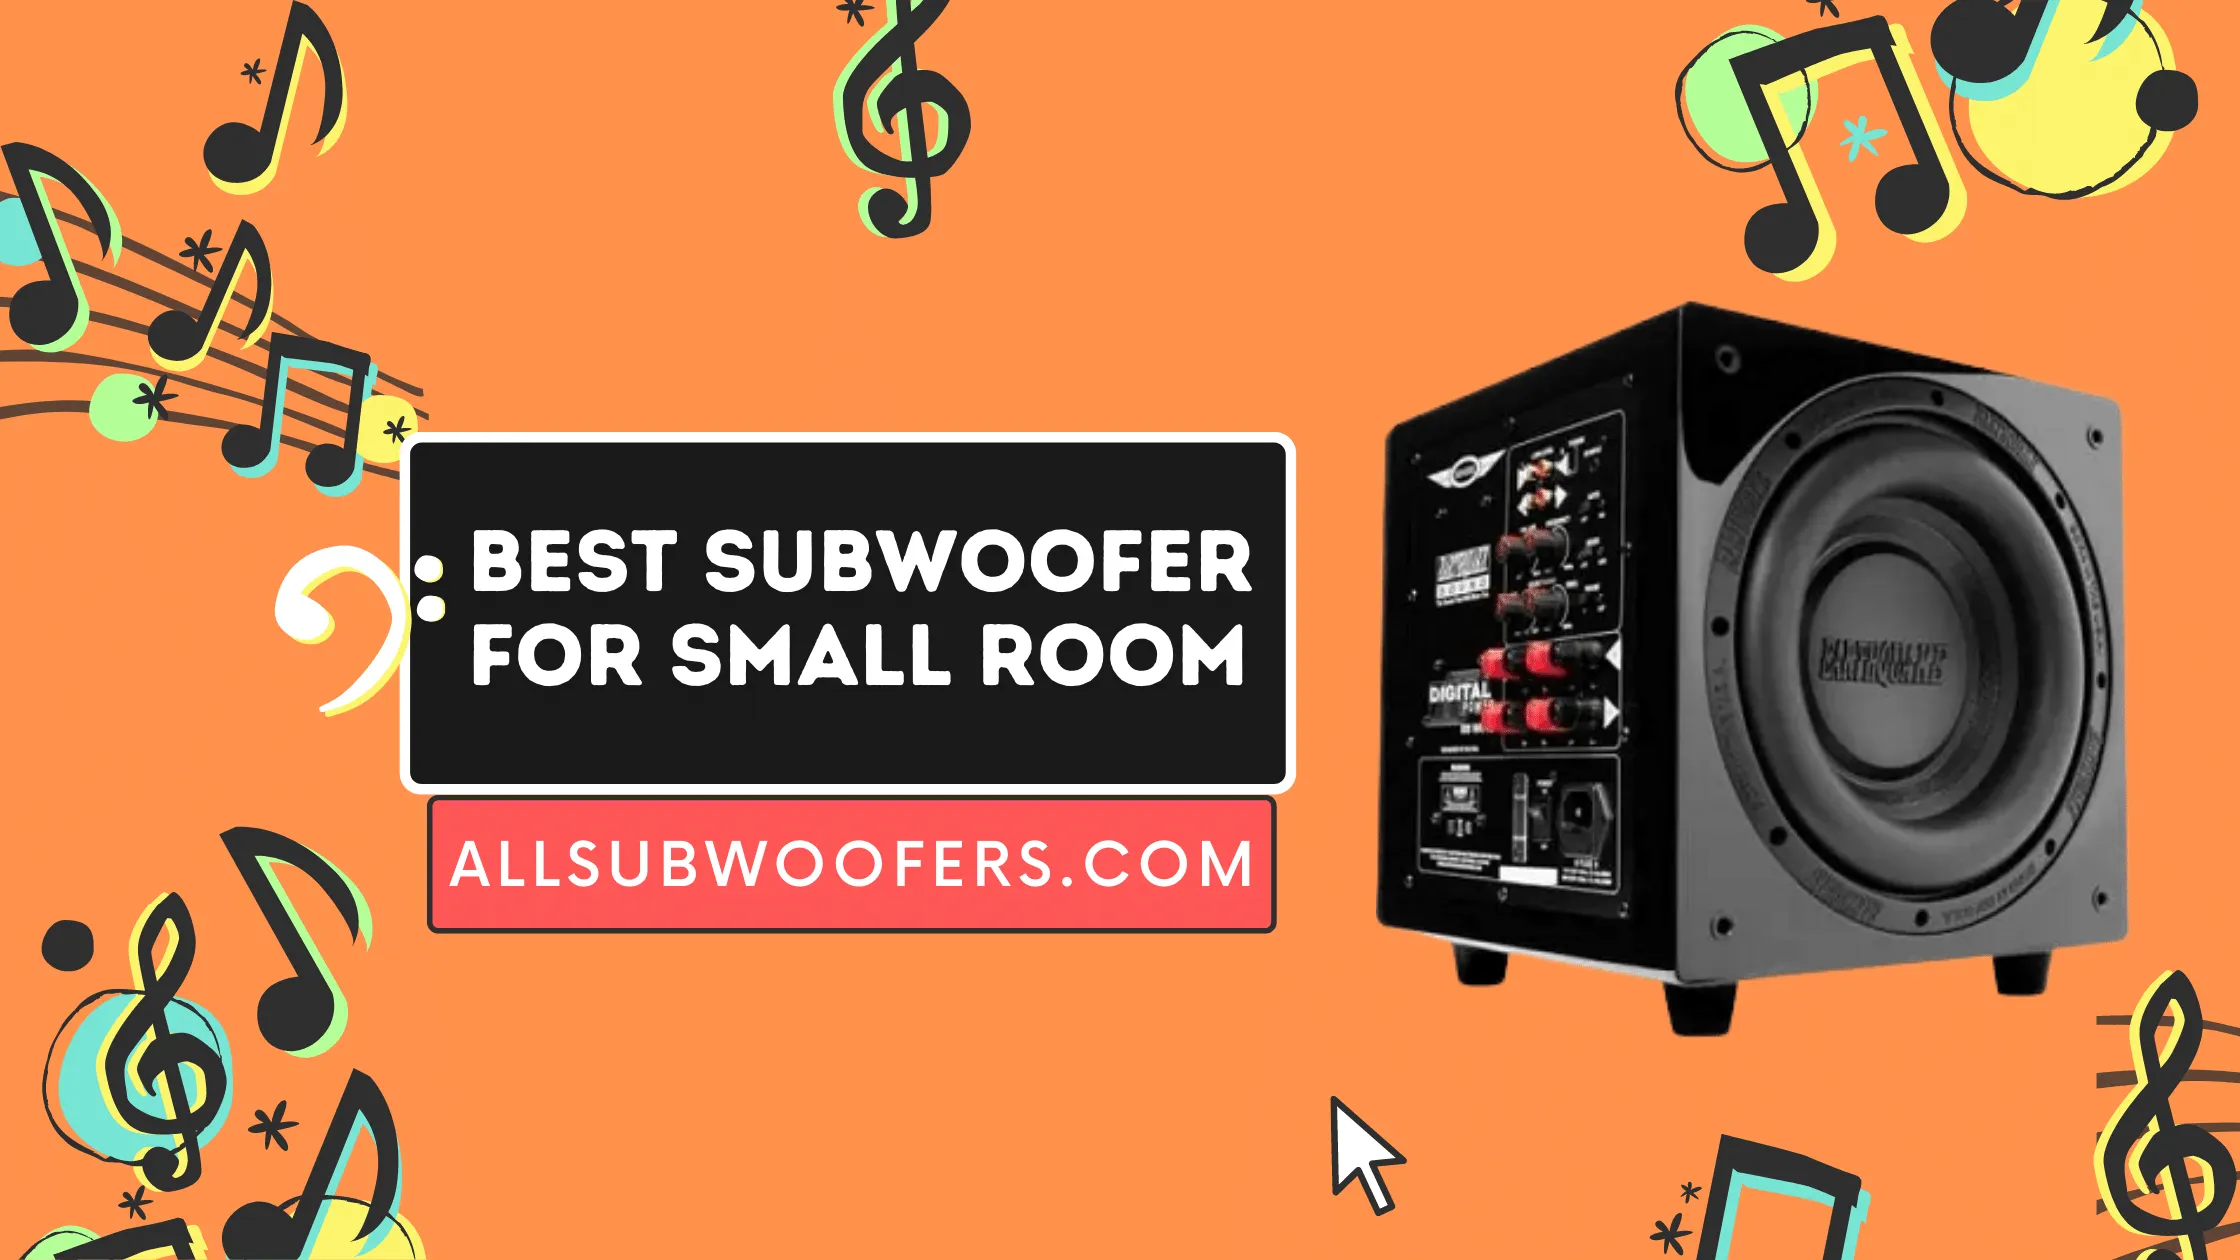 Best Subwoofer For Small Room – Complete Guide